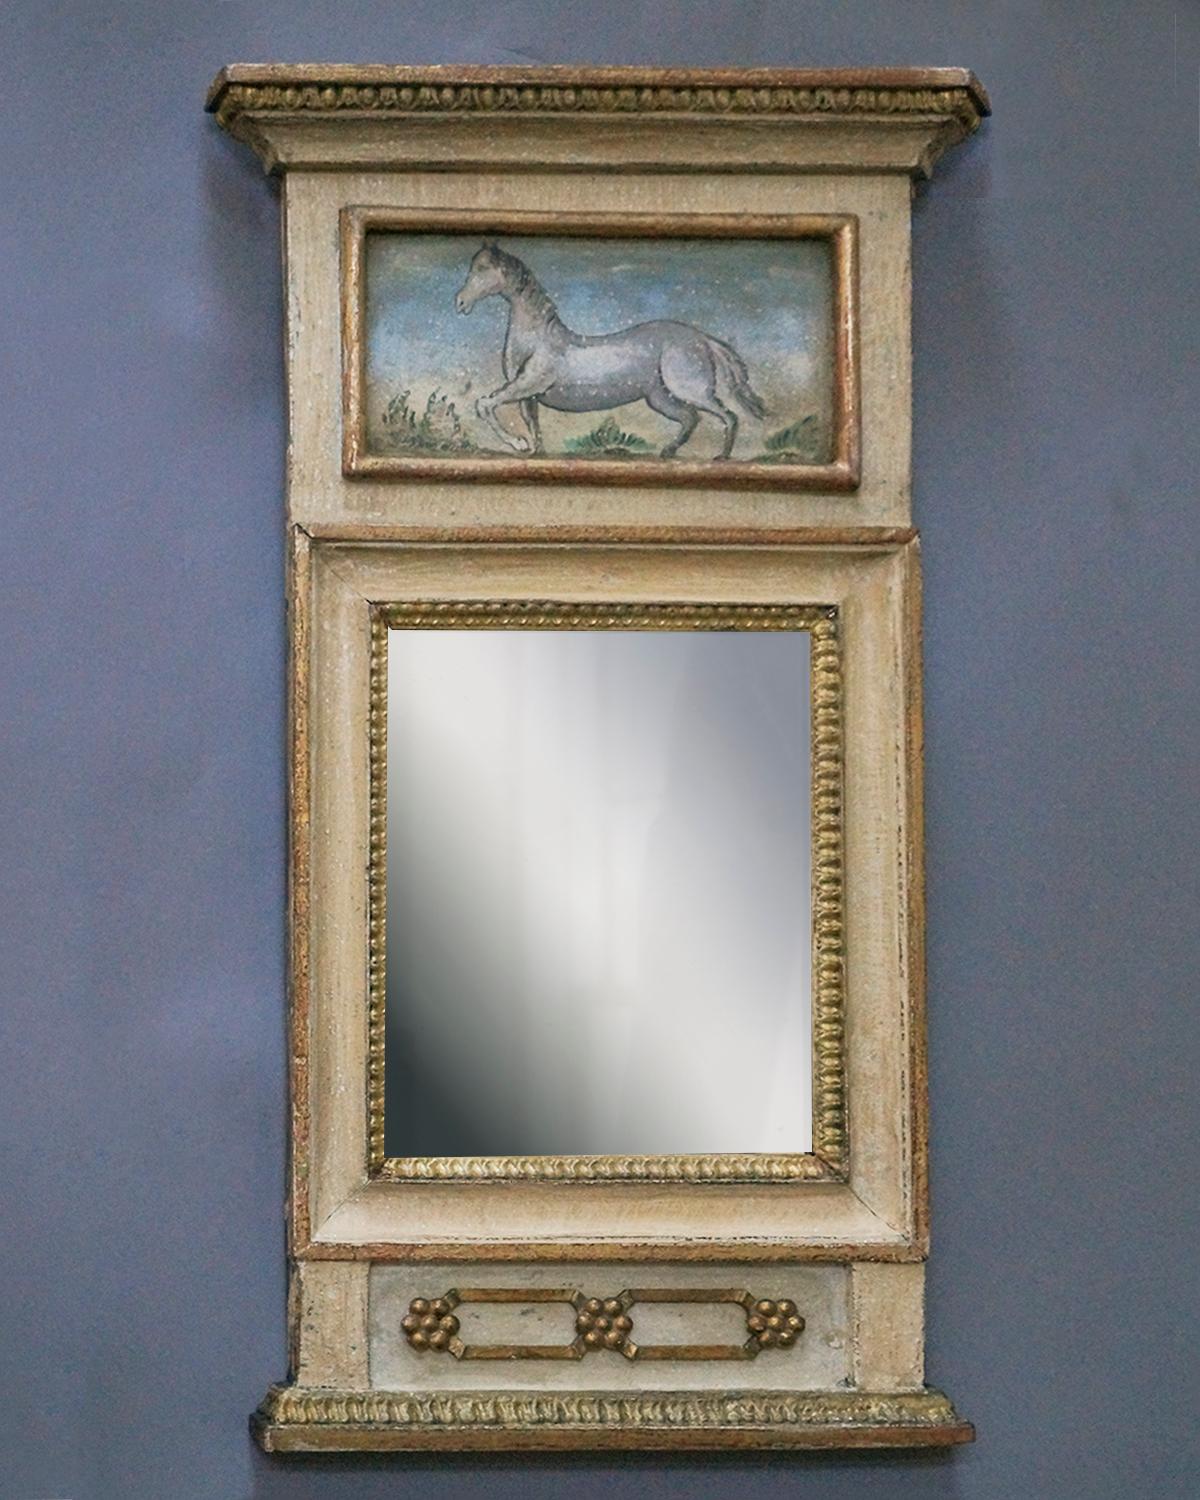 Period Swedish mirror, circa 1790, with original painted and parcel-gilt surface, mirror glass, and back. The unusual upper panel features a prancing white horse. A charming and characteristically Swedish piece.